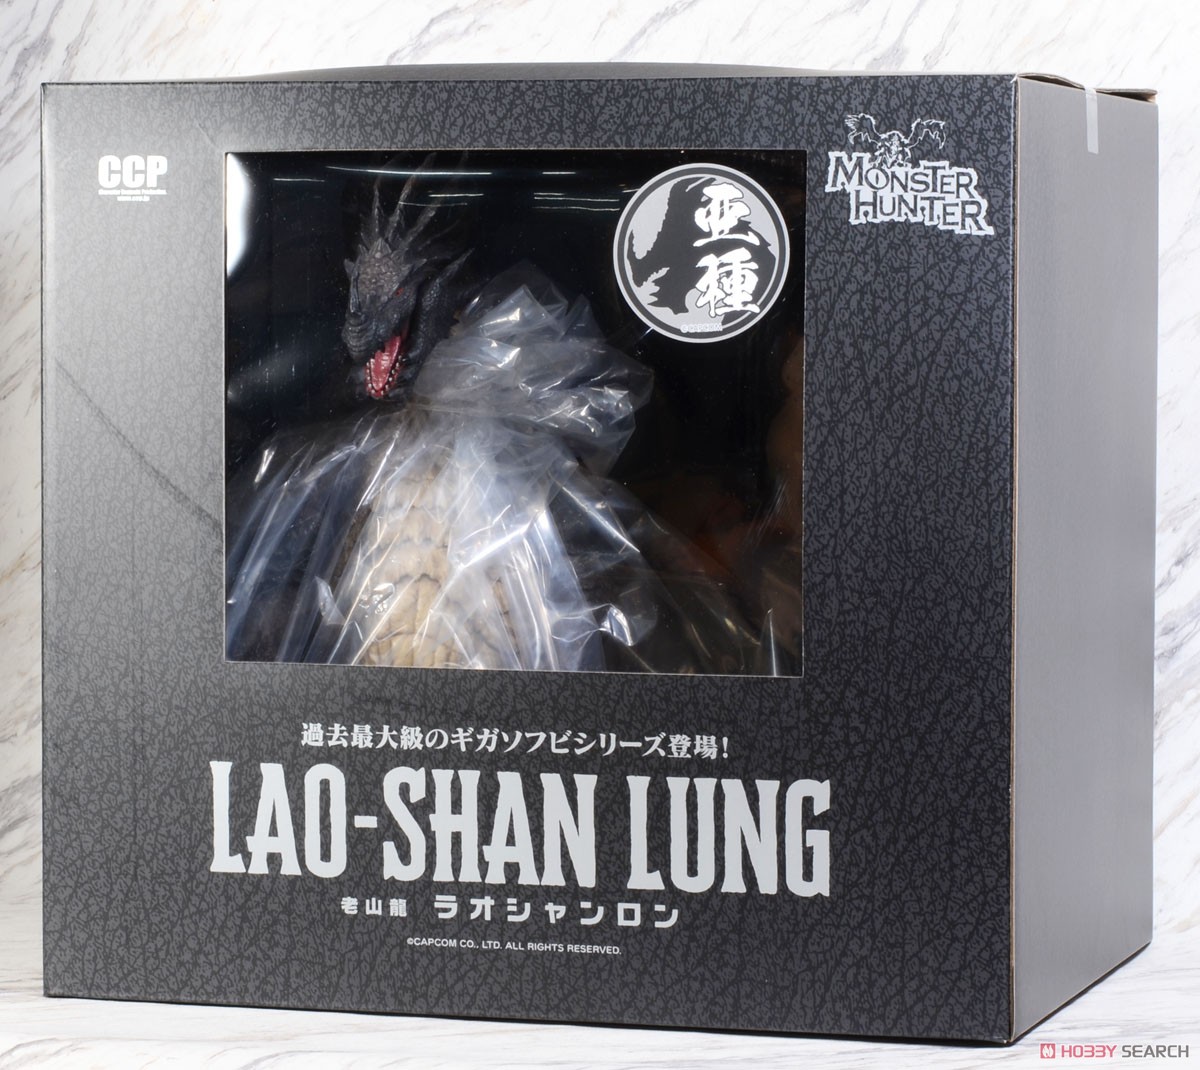 Monster Hunter Giga Soft Vinyl Series 02 Ashen Lao-Shan Lung (Completed) Package1